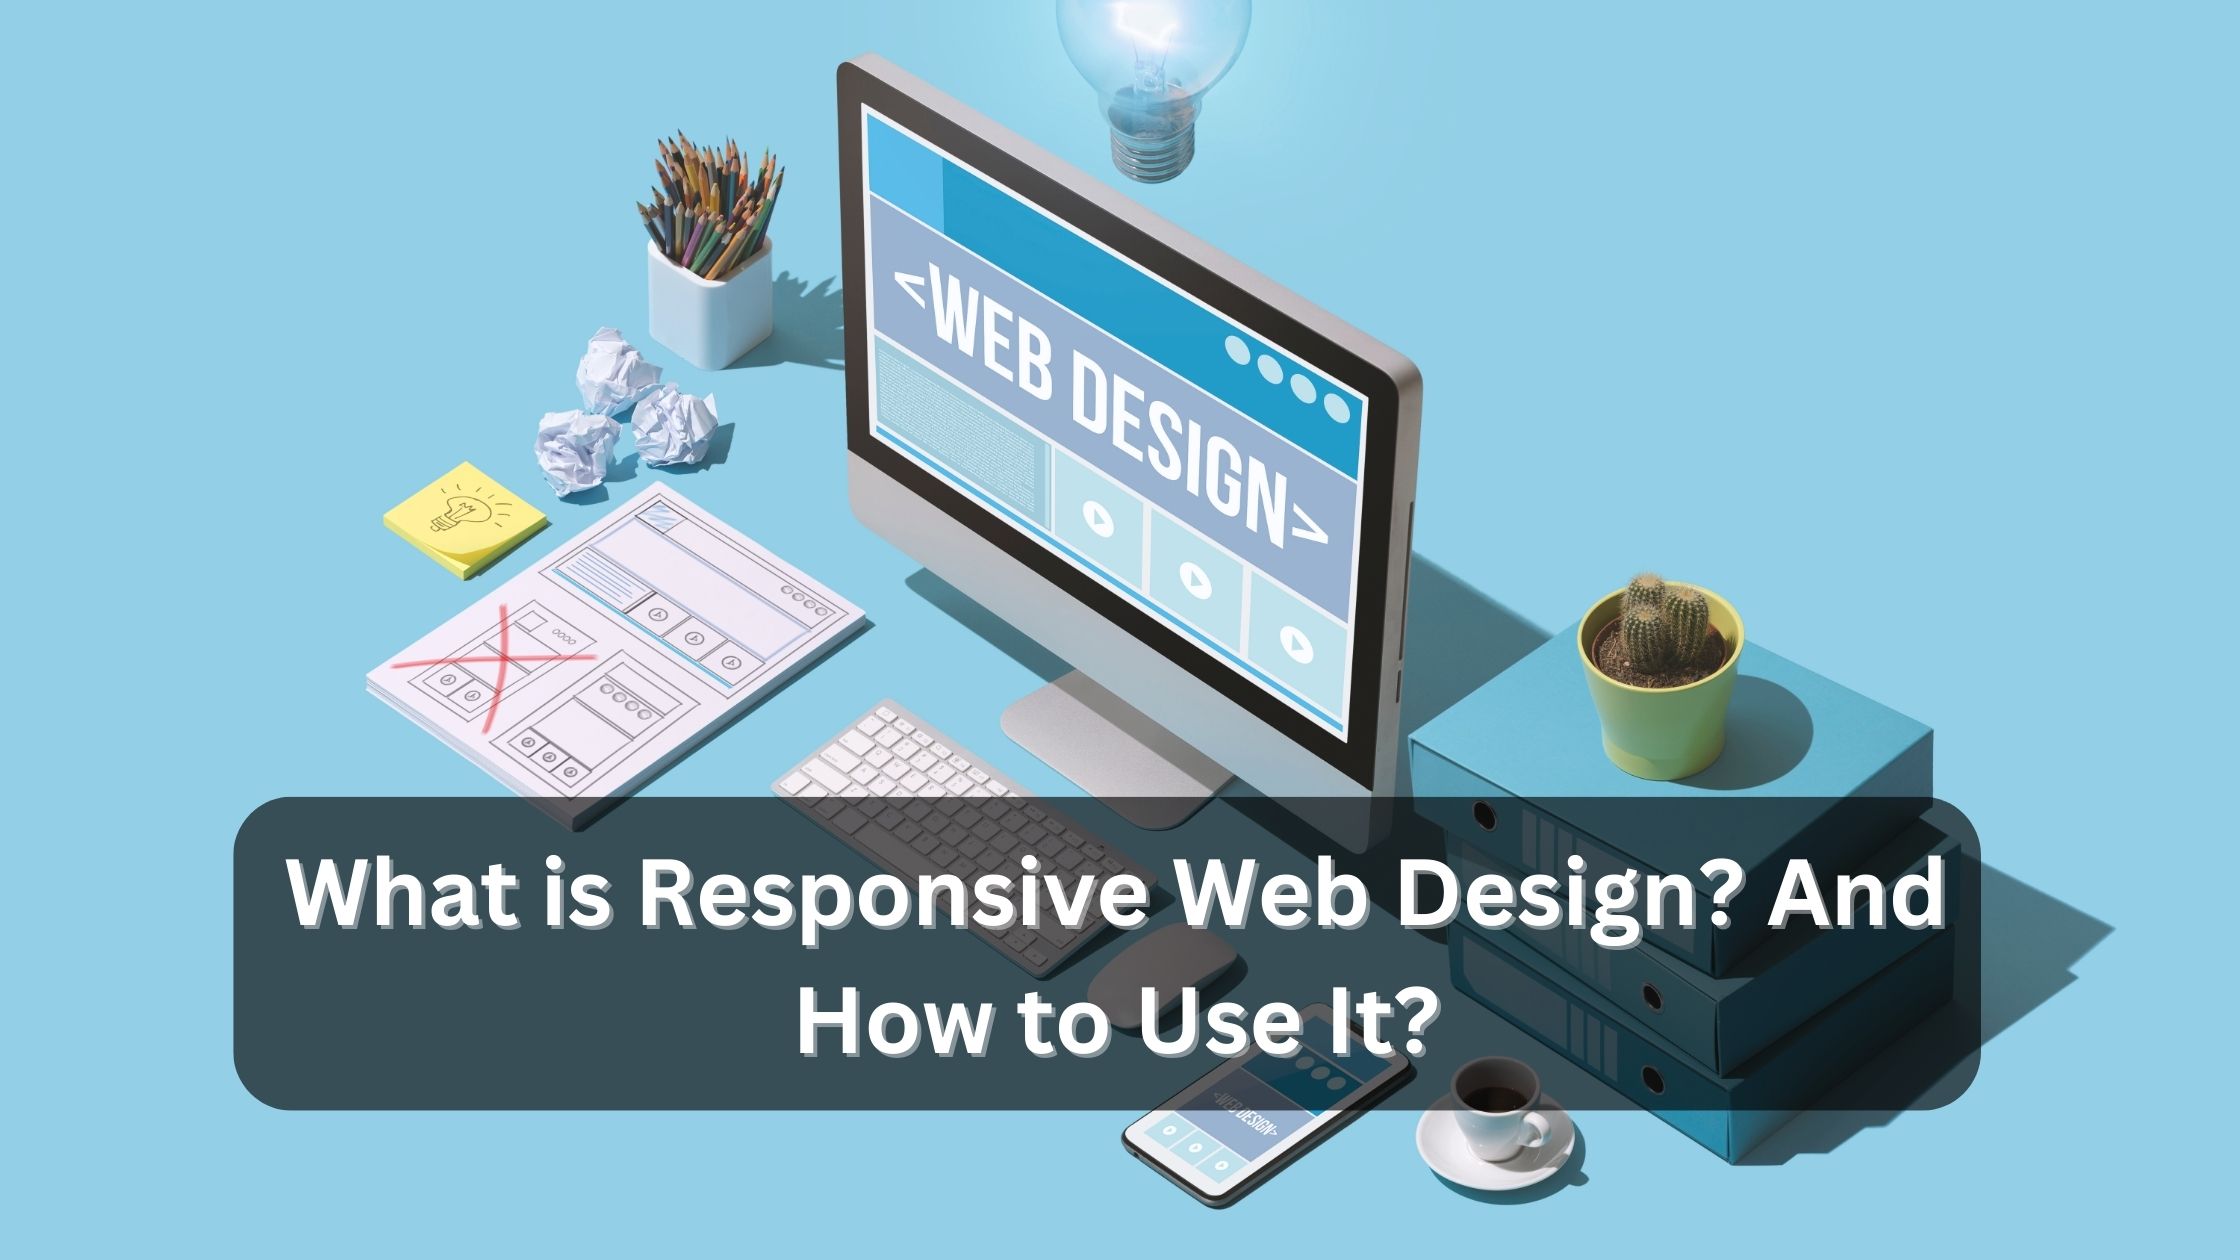 What is Responsive Web Design? And How to Use It?